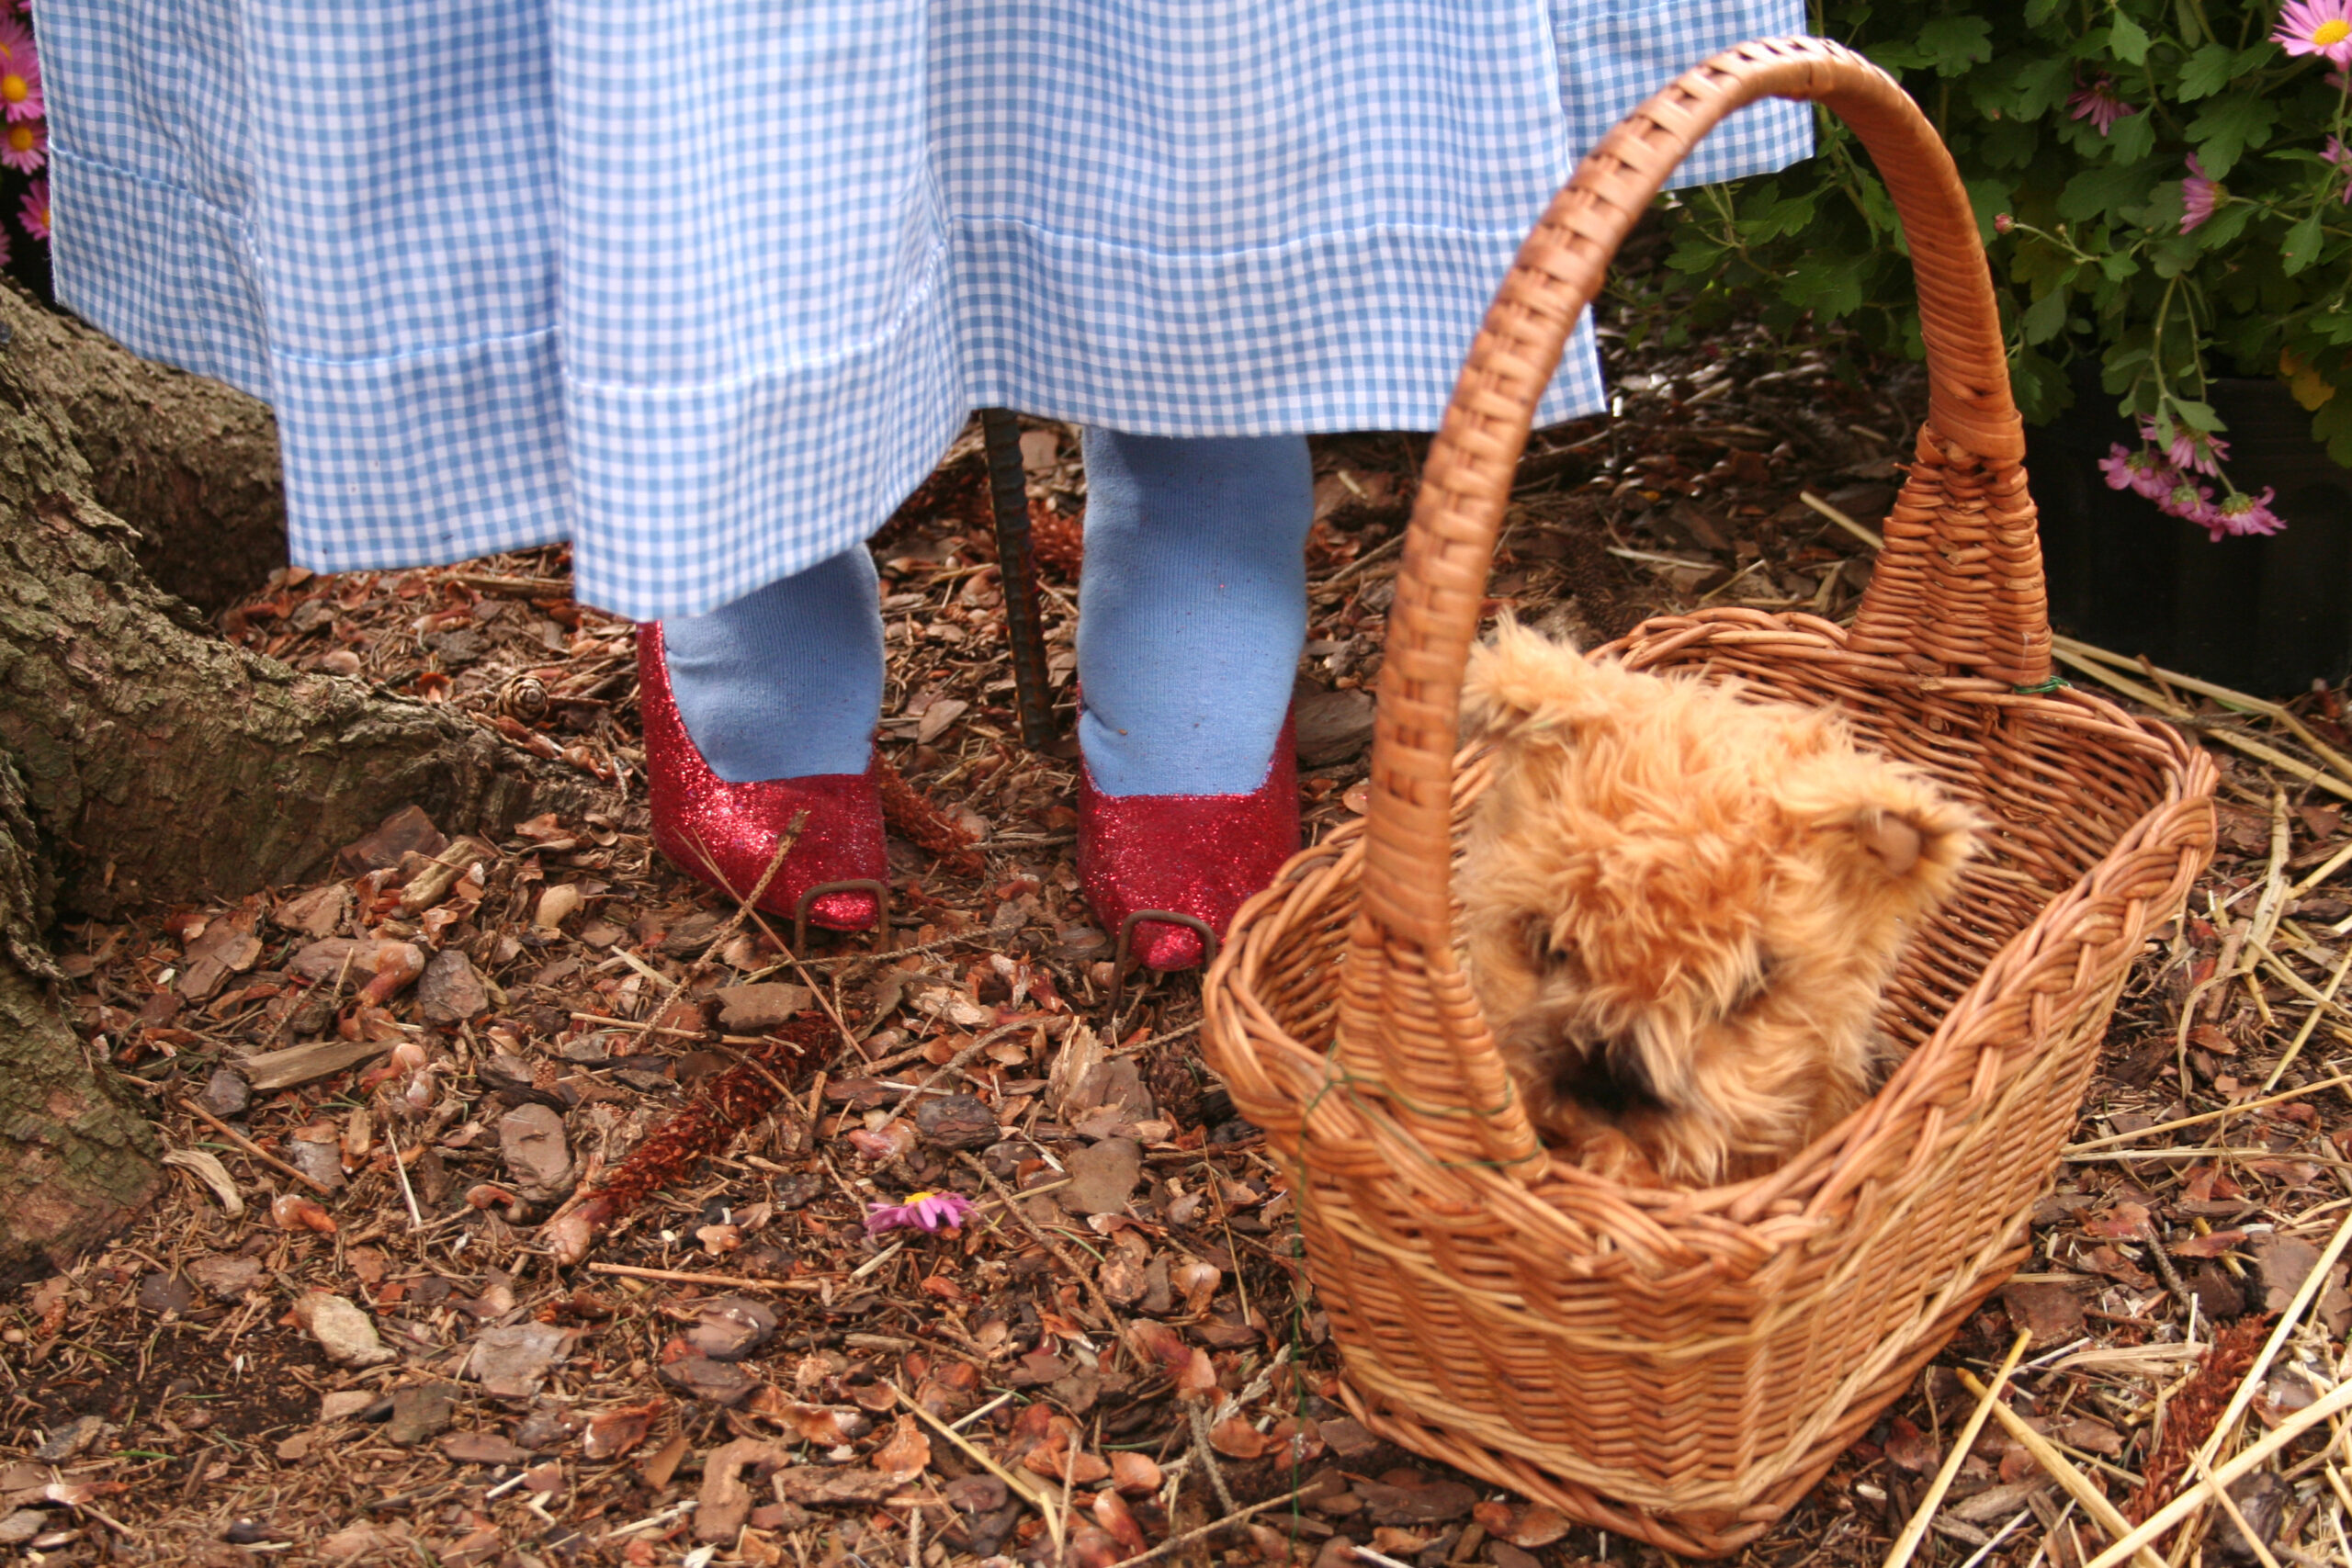 A photo of a person's legs and feet wearing a white dress, stocking and ruby slippers, with a picnic basket holding a dog plush (meant to be Toto) rests nearby.